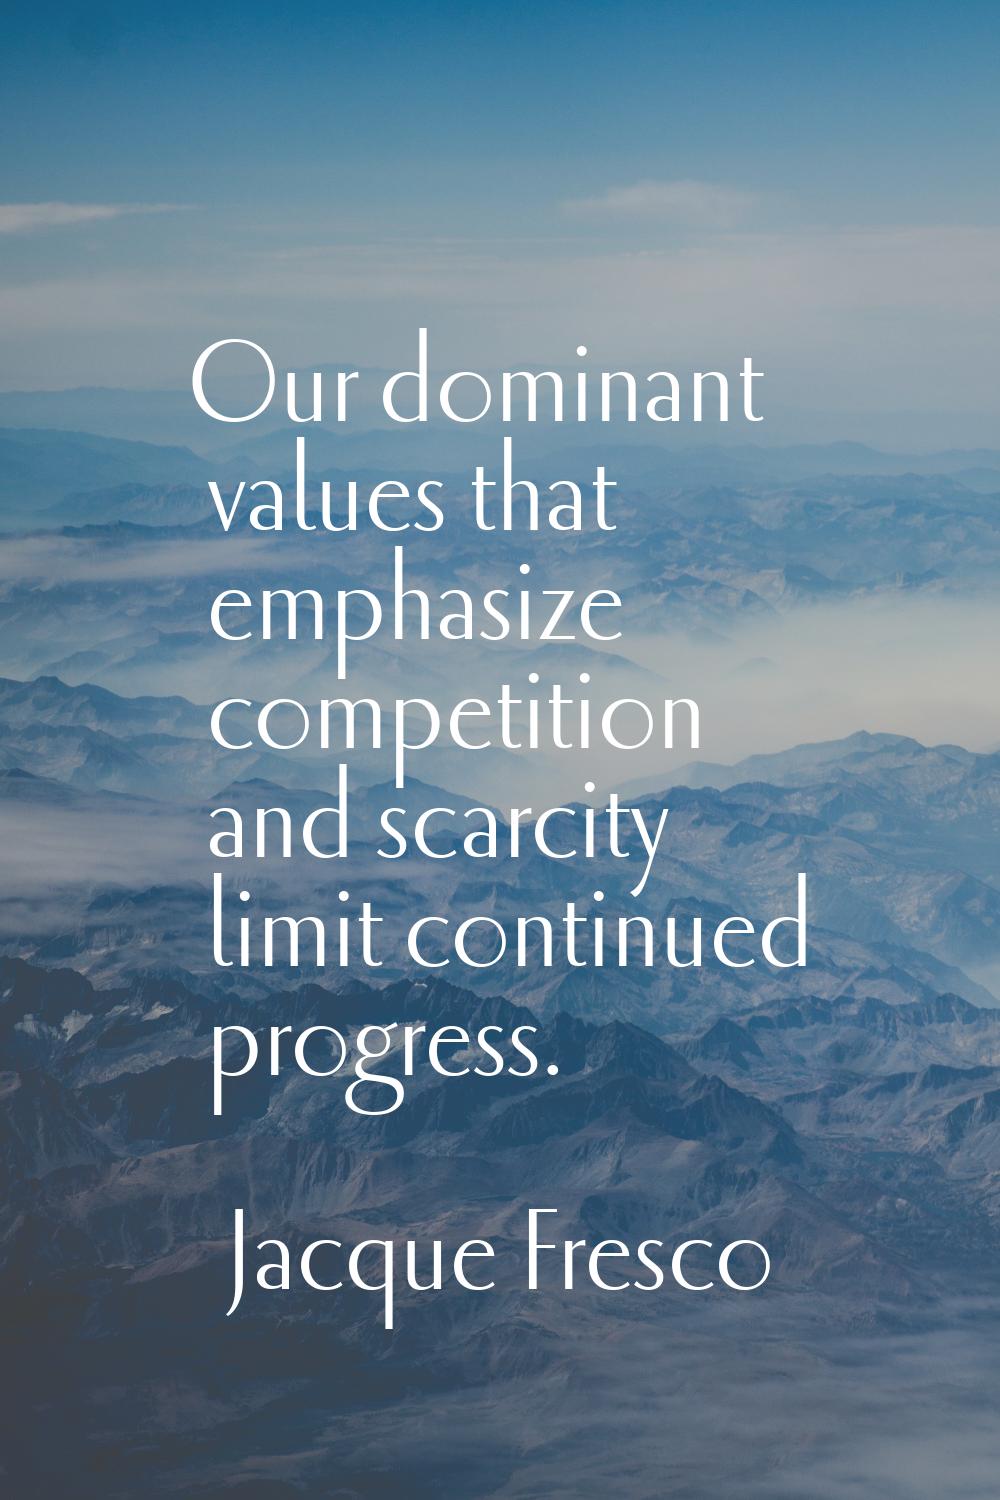 Our dominant values that emphasize competition and scarcity limit continued progress.